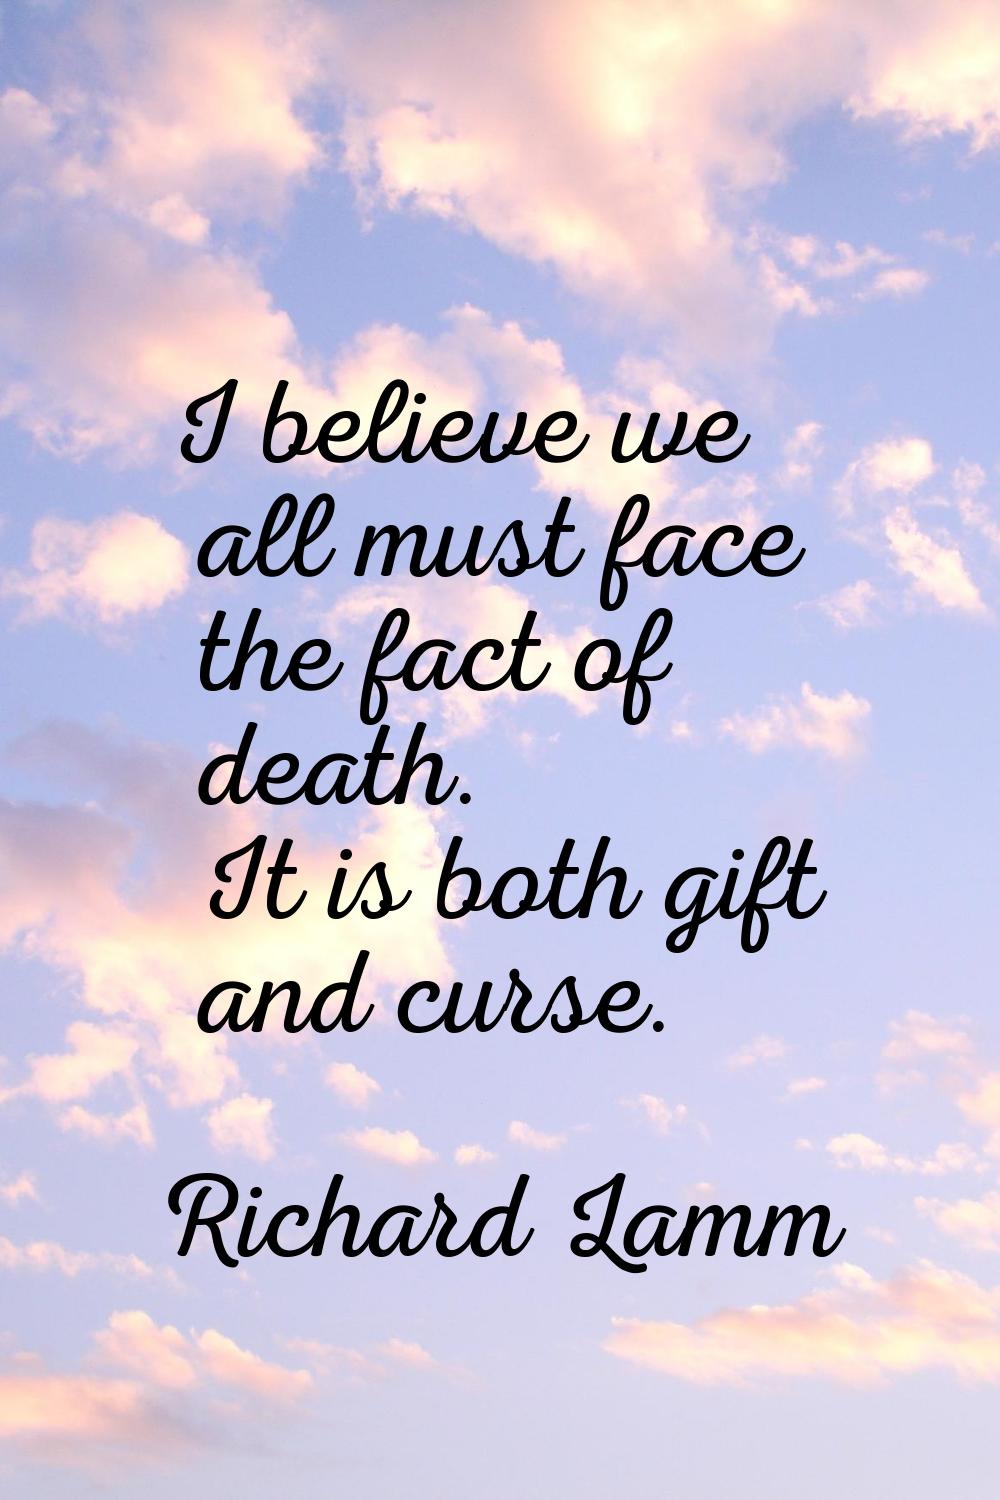 I believe we all must face the fact of death. It is both gift and curse.